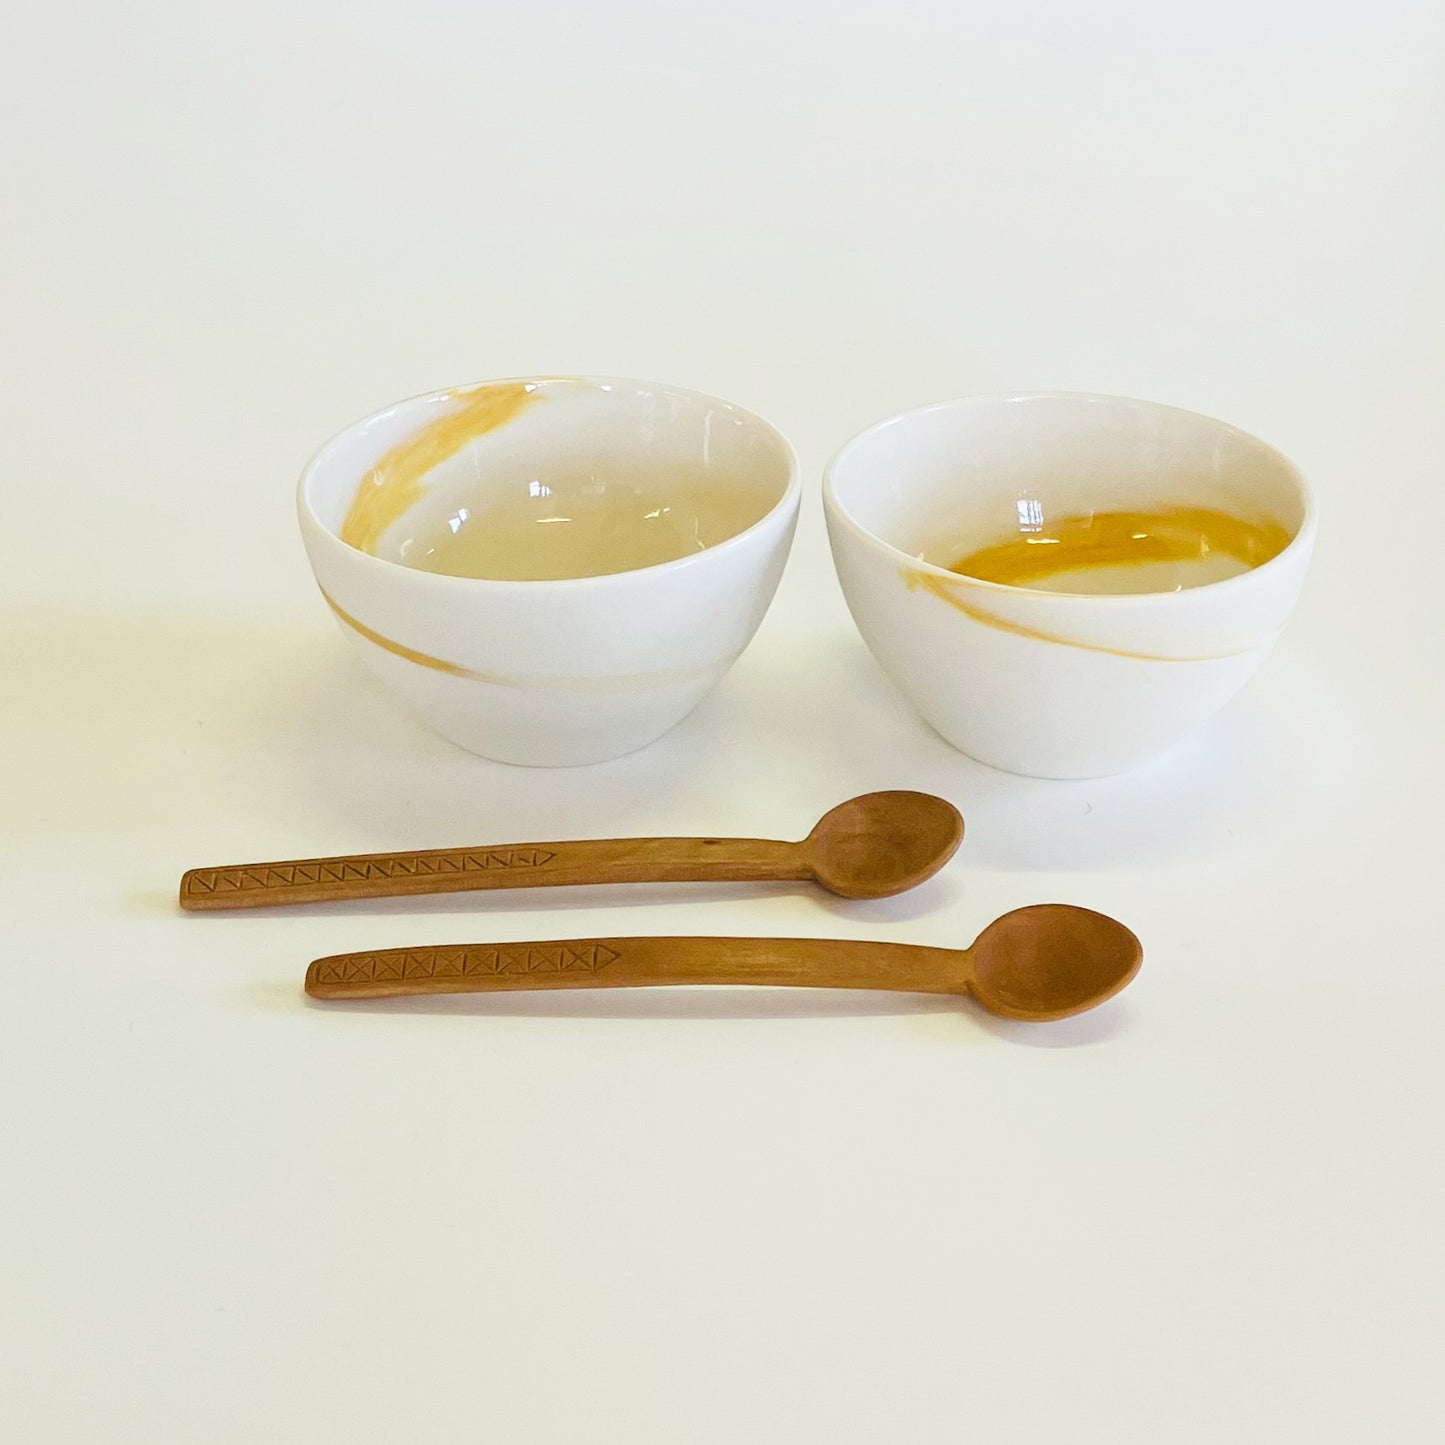 Set of 2 yellow bowls with spoons